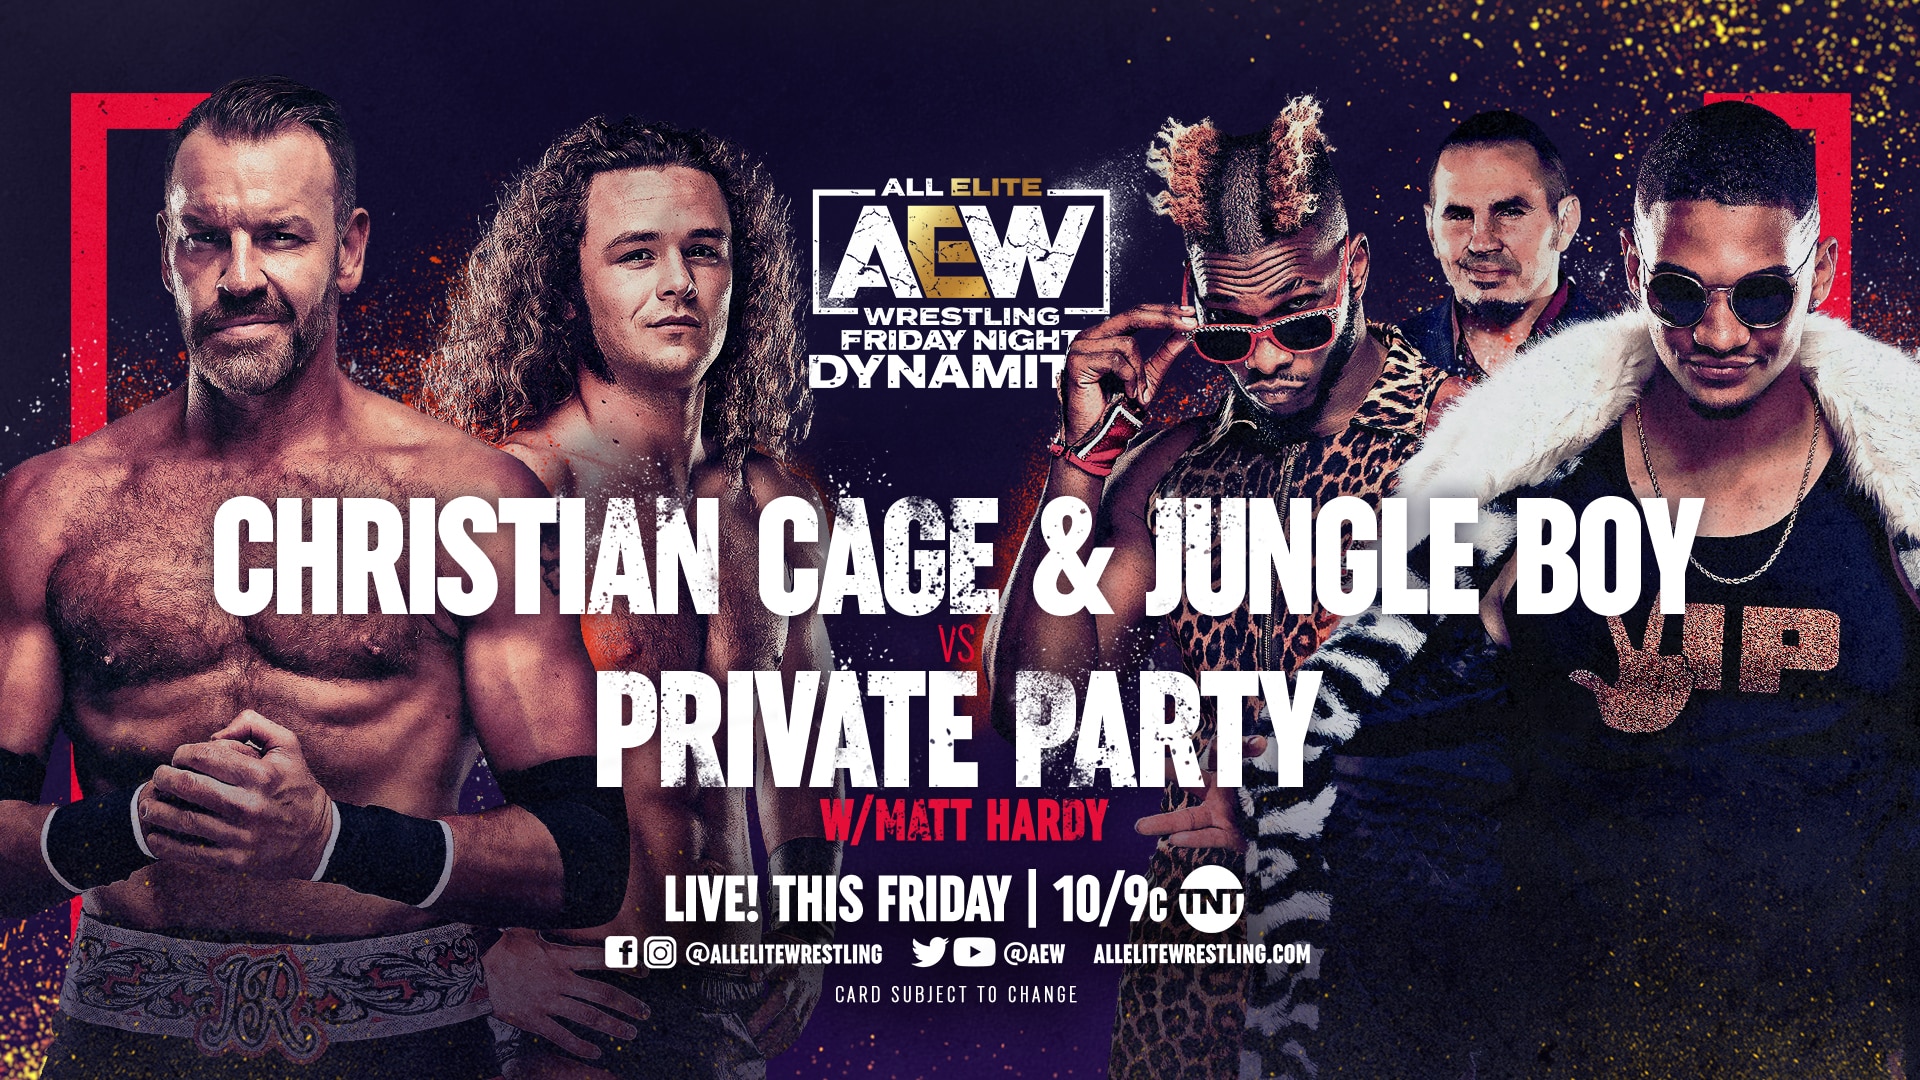 Christian Cage and Jungle Boy vs Private Party AEW Dynamite IGNITE for 6/4/21